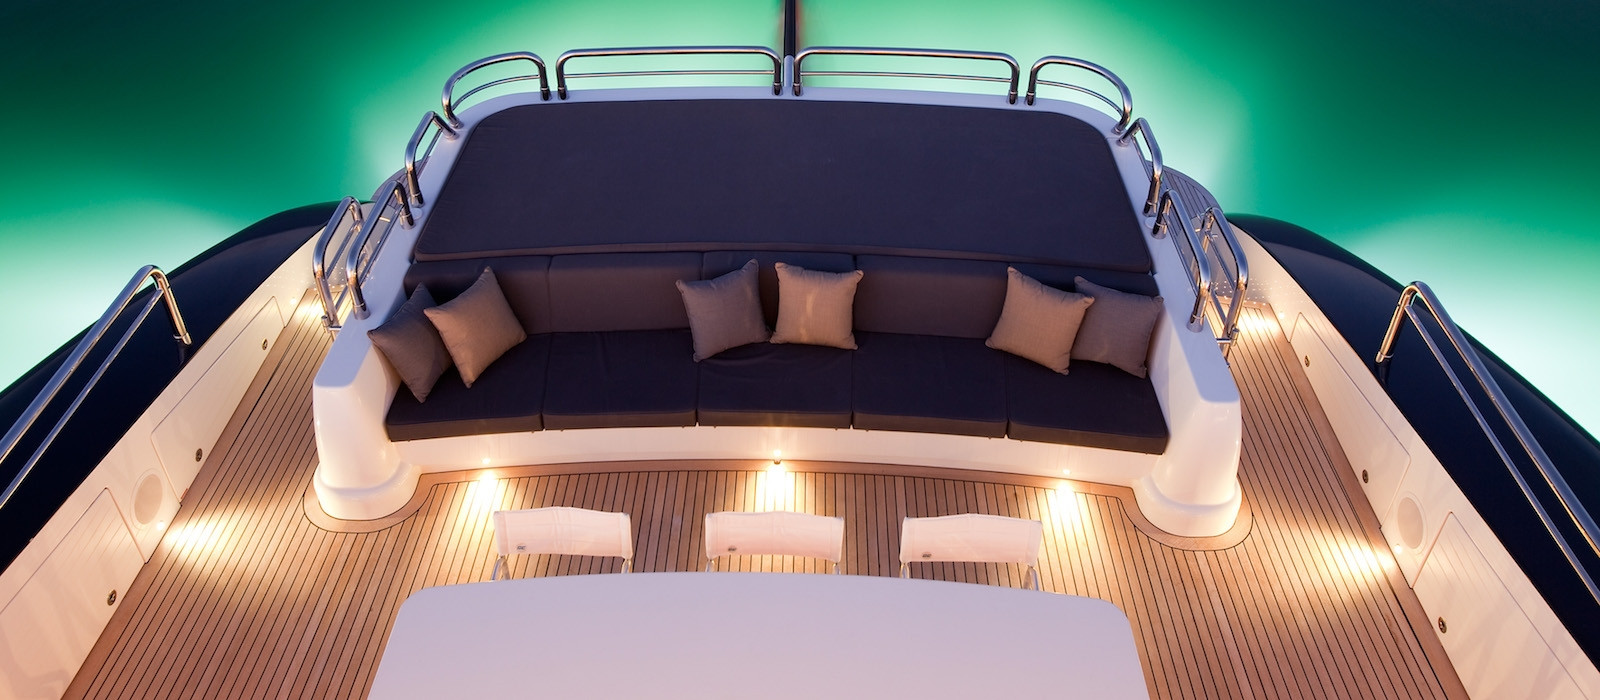 Quantum super yacht hire with night lights on